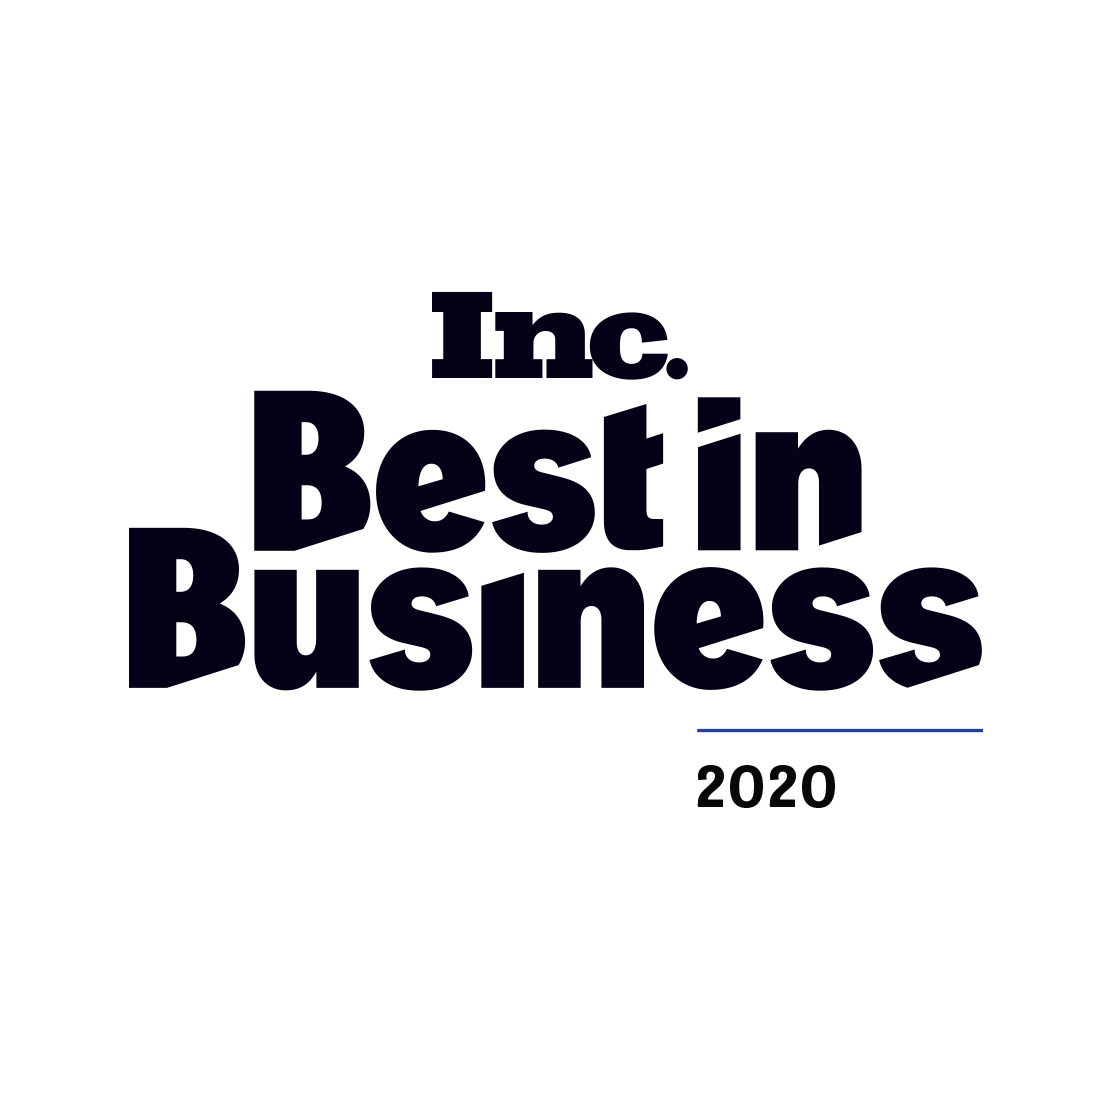 KnowBe4 Awarded Gold Medal in Security for Inc.’s 2020 Best in Business List